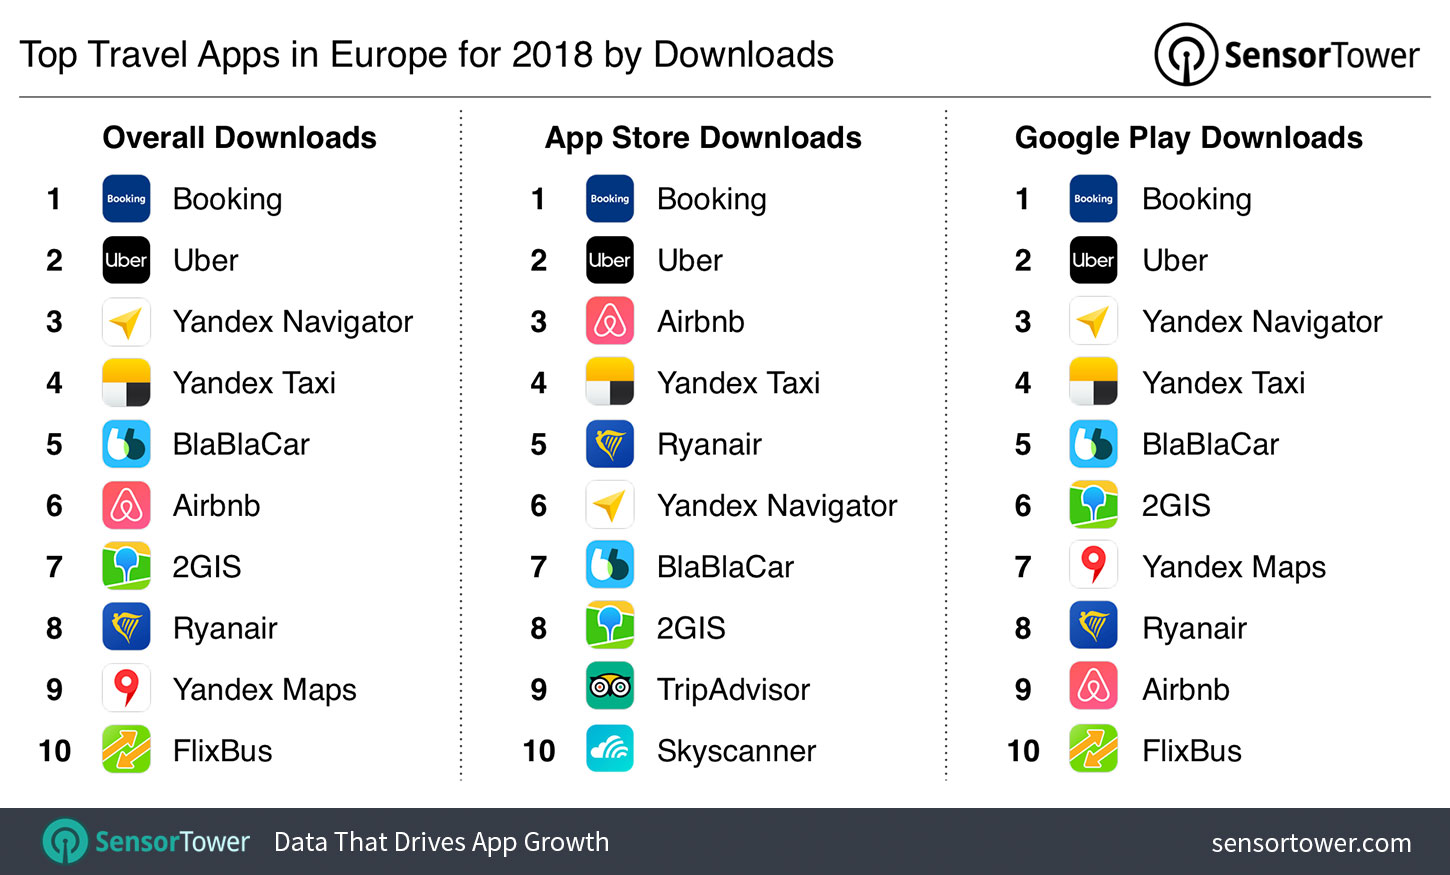 Top Travel Apps in Europe for 2018 by Downloads